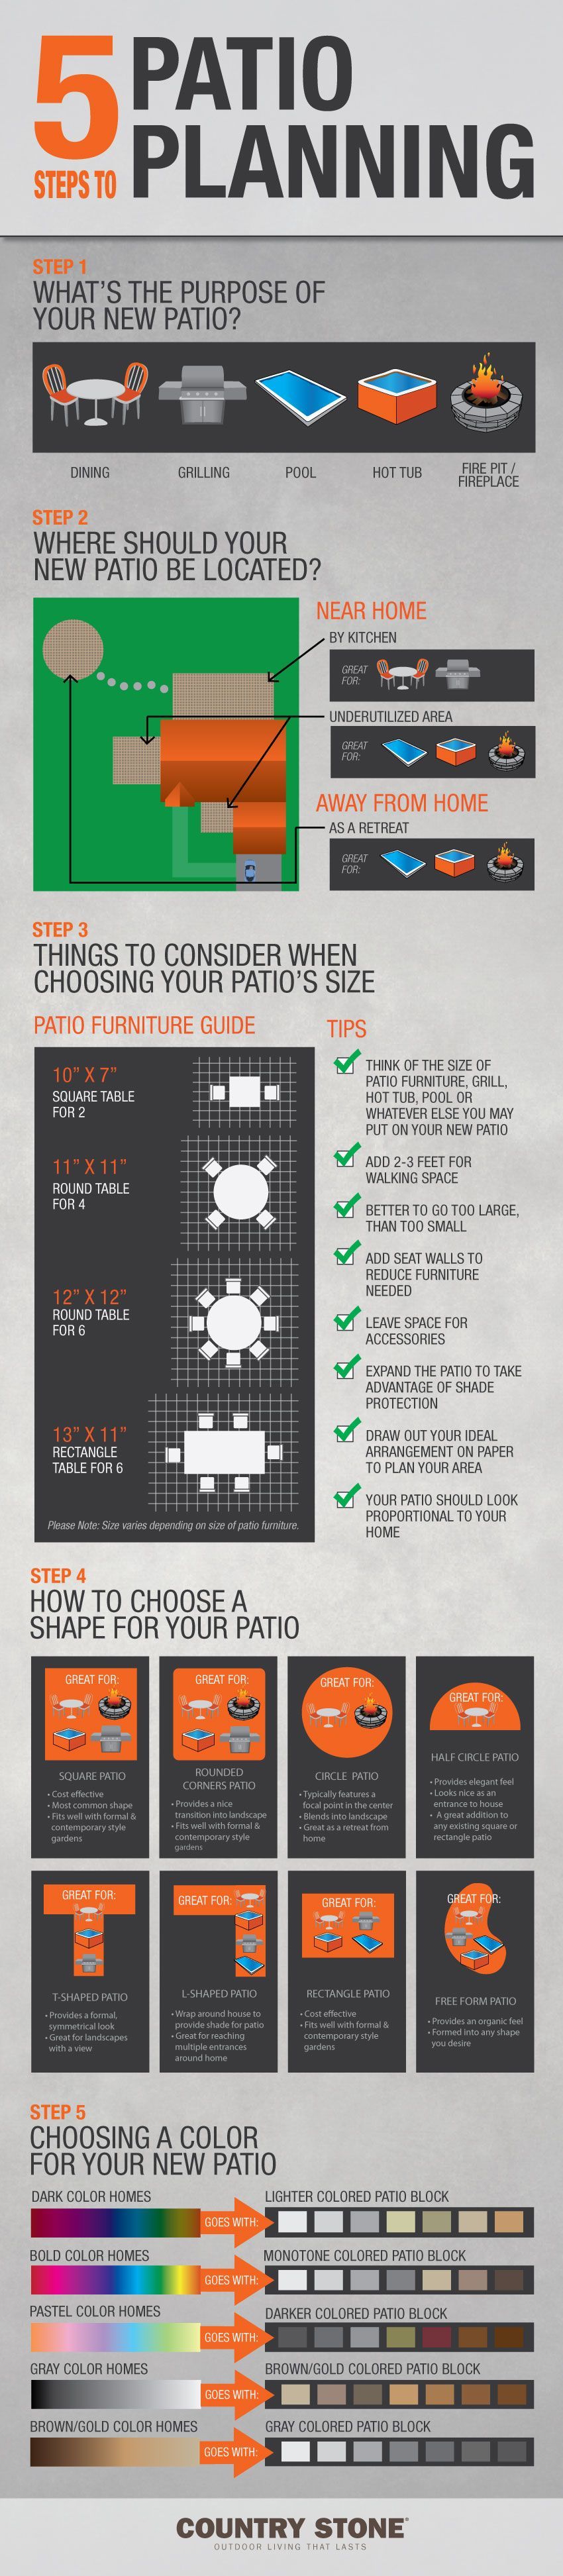 Are you in the process of planning a new patio? Try our 5 Step Guide to Patio Planning!